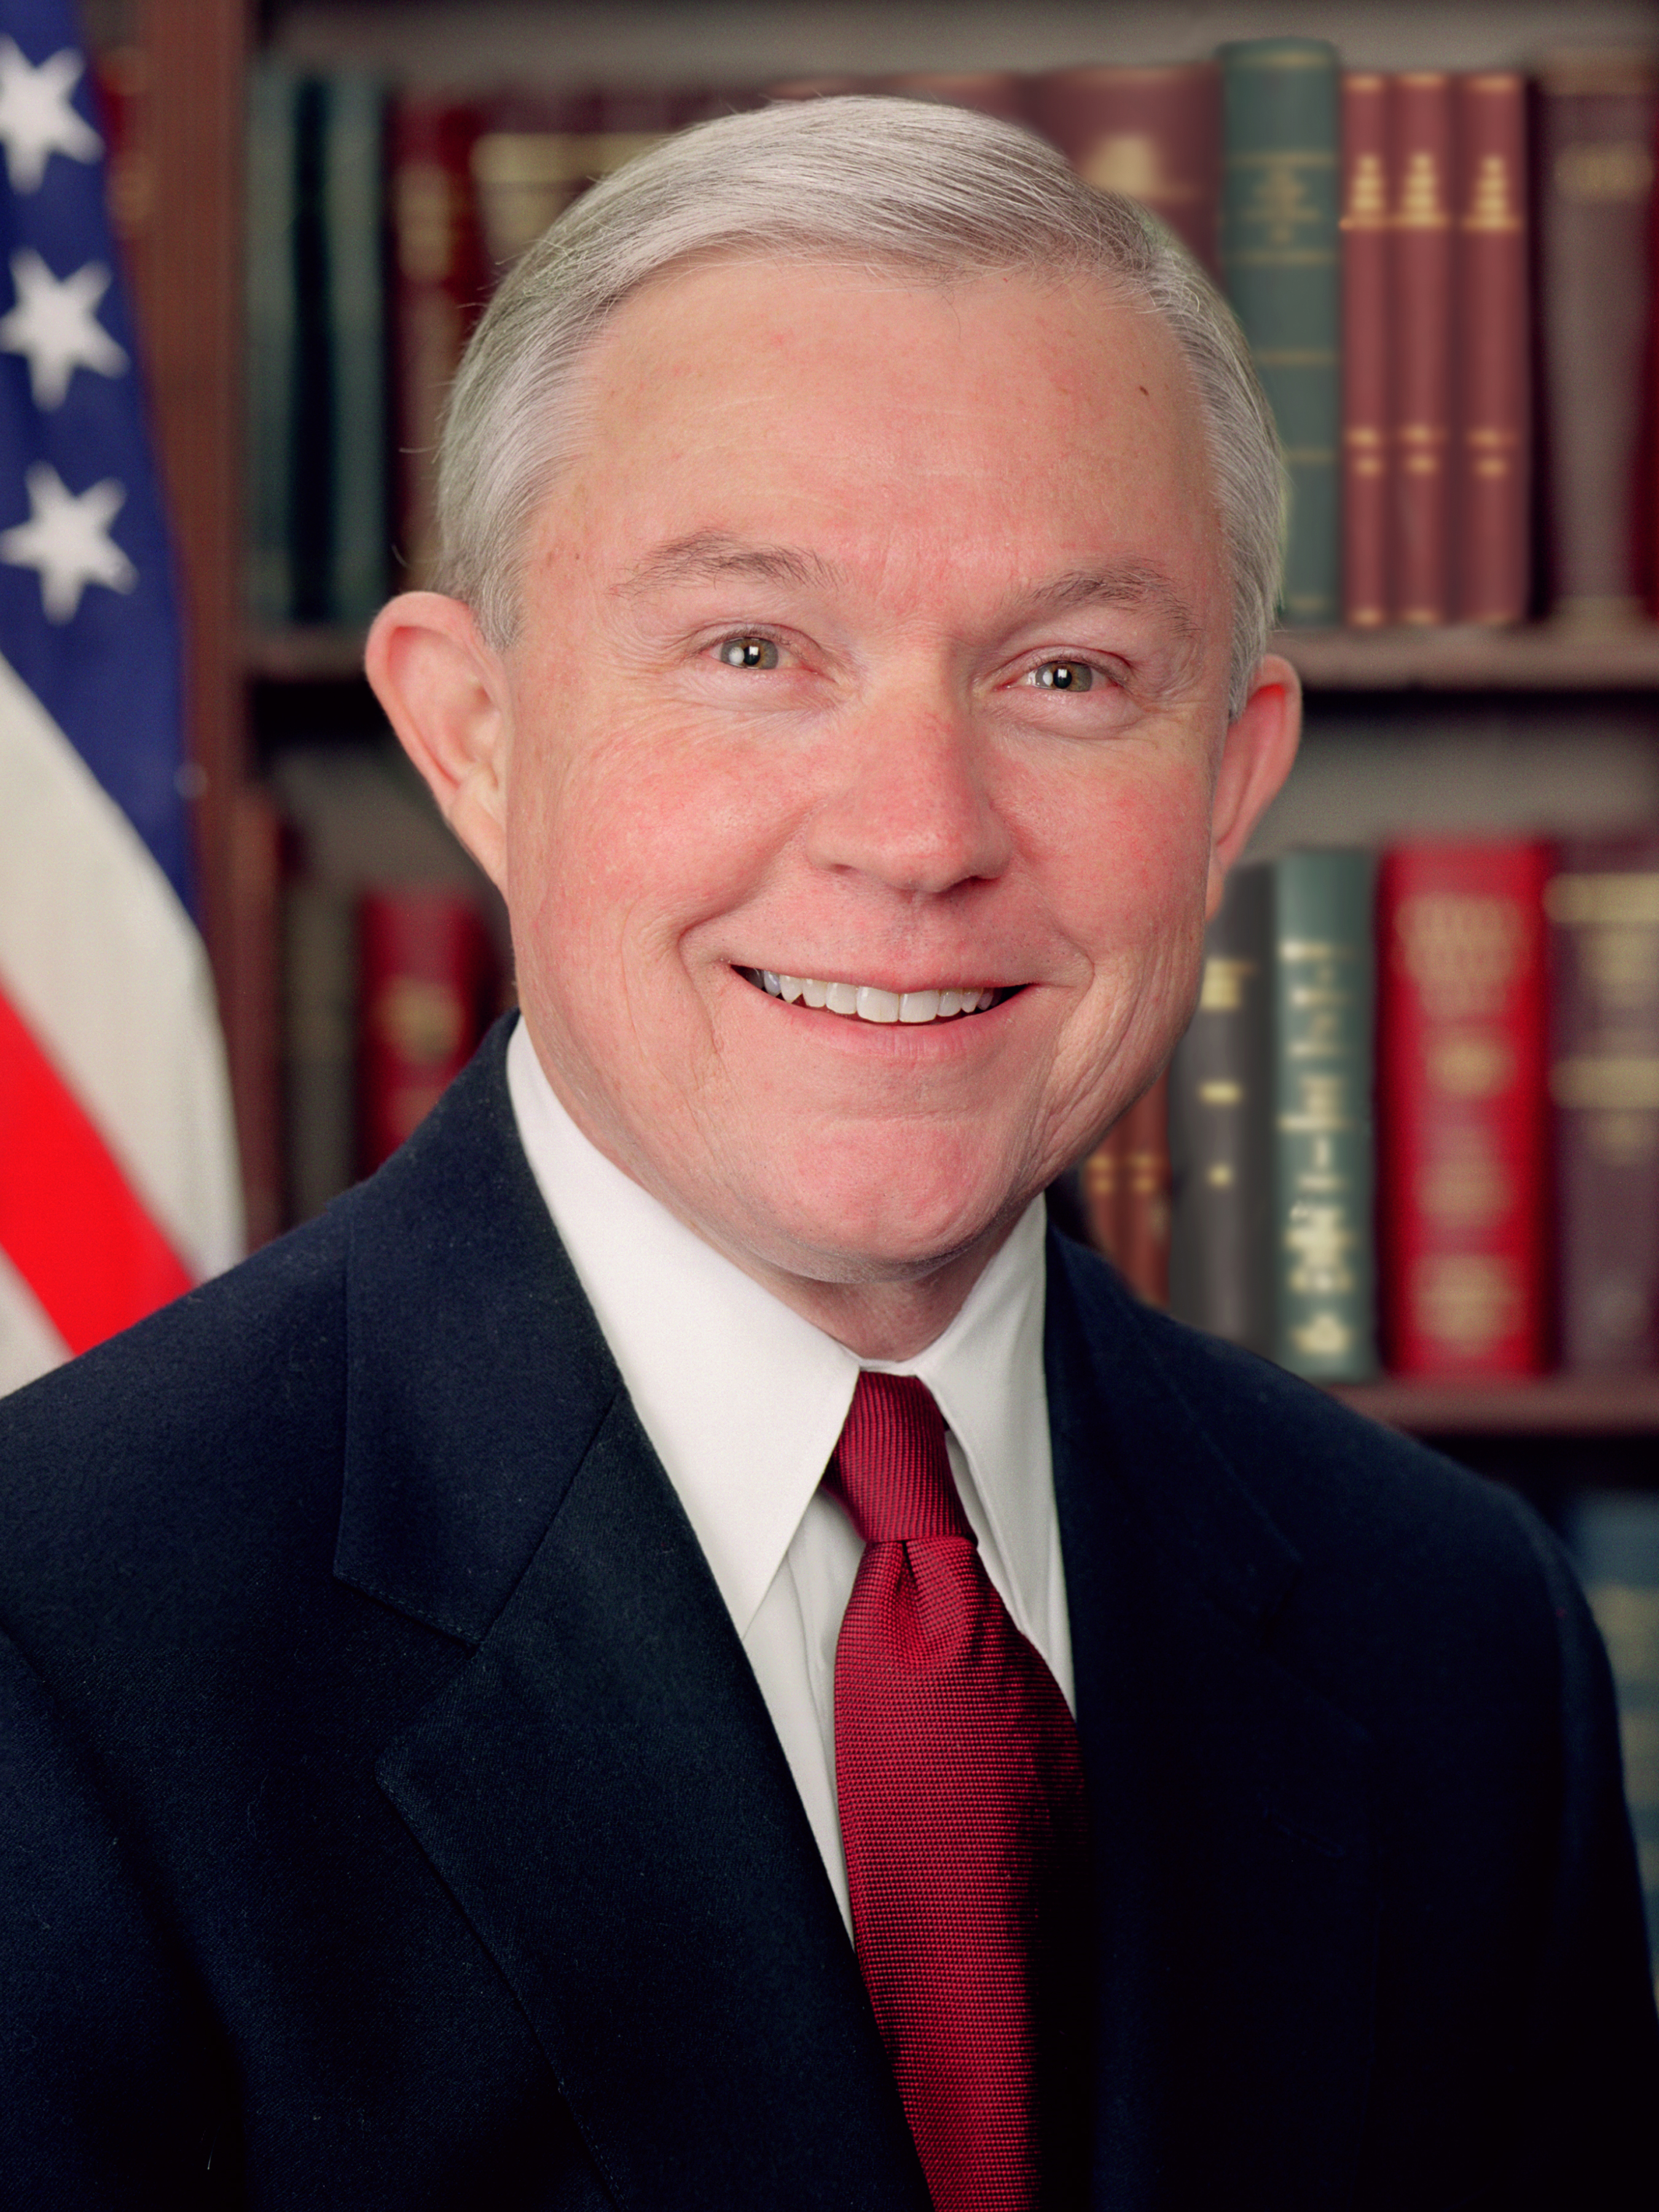 The 75-year old son of father Jefferson Sessions and mother Abbie Powe Jeff Sessions in 2022 photo. Jeff Sessions earned a  million dollar salary - leaving the net worth at 7.5 million in 2022